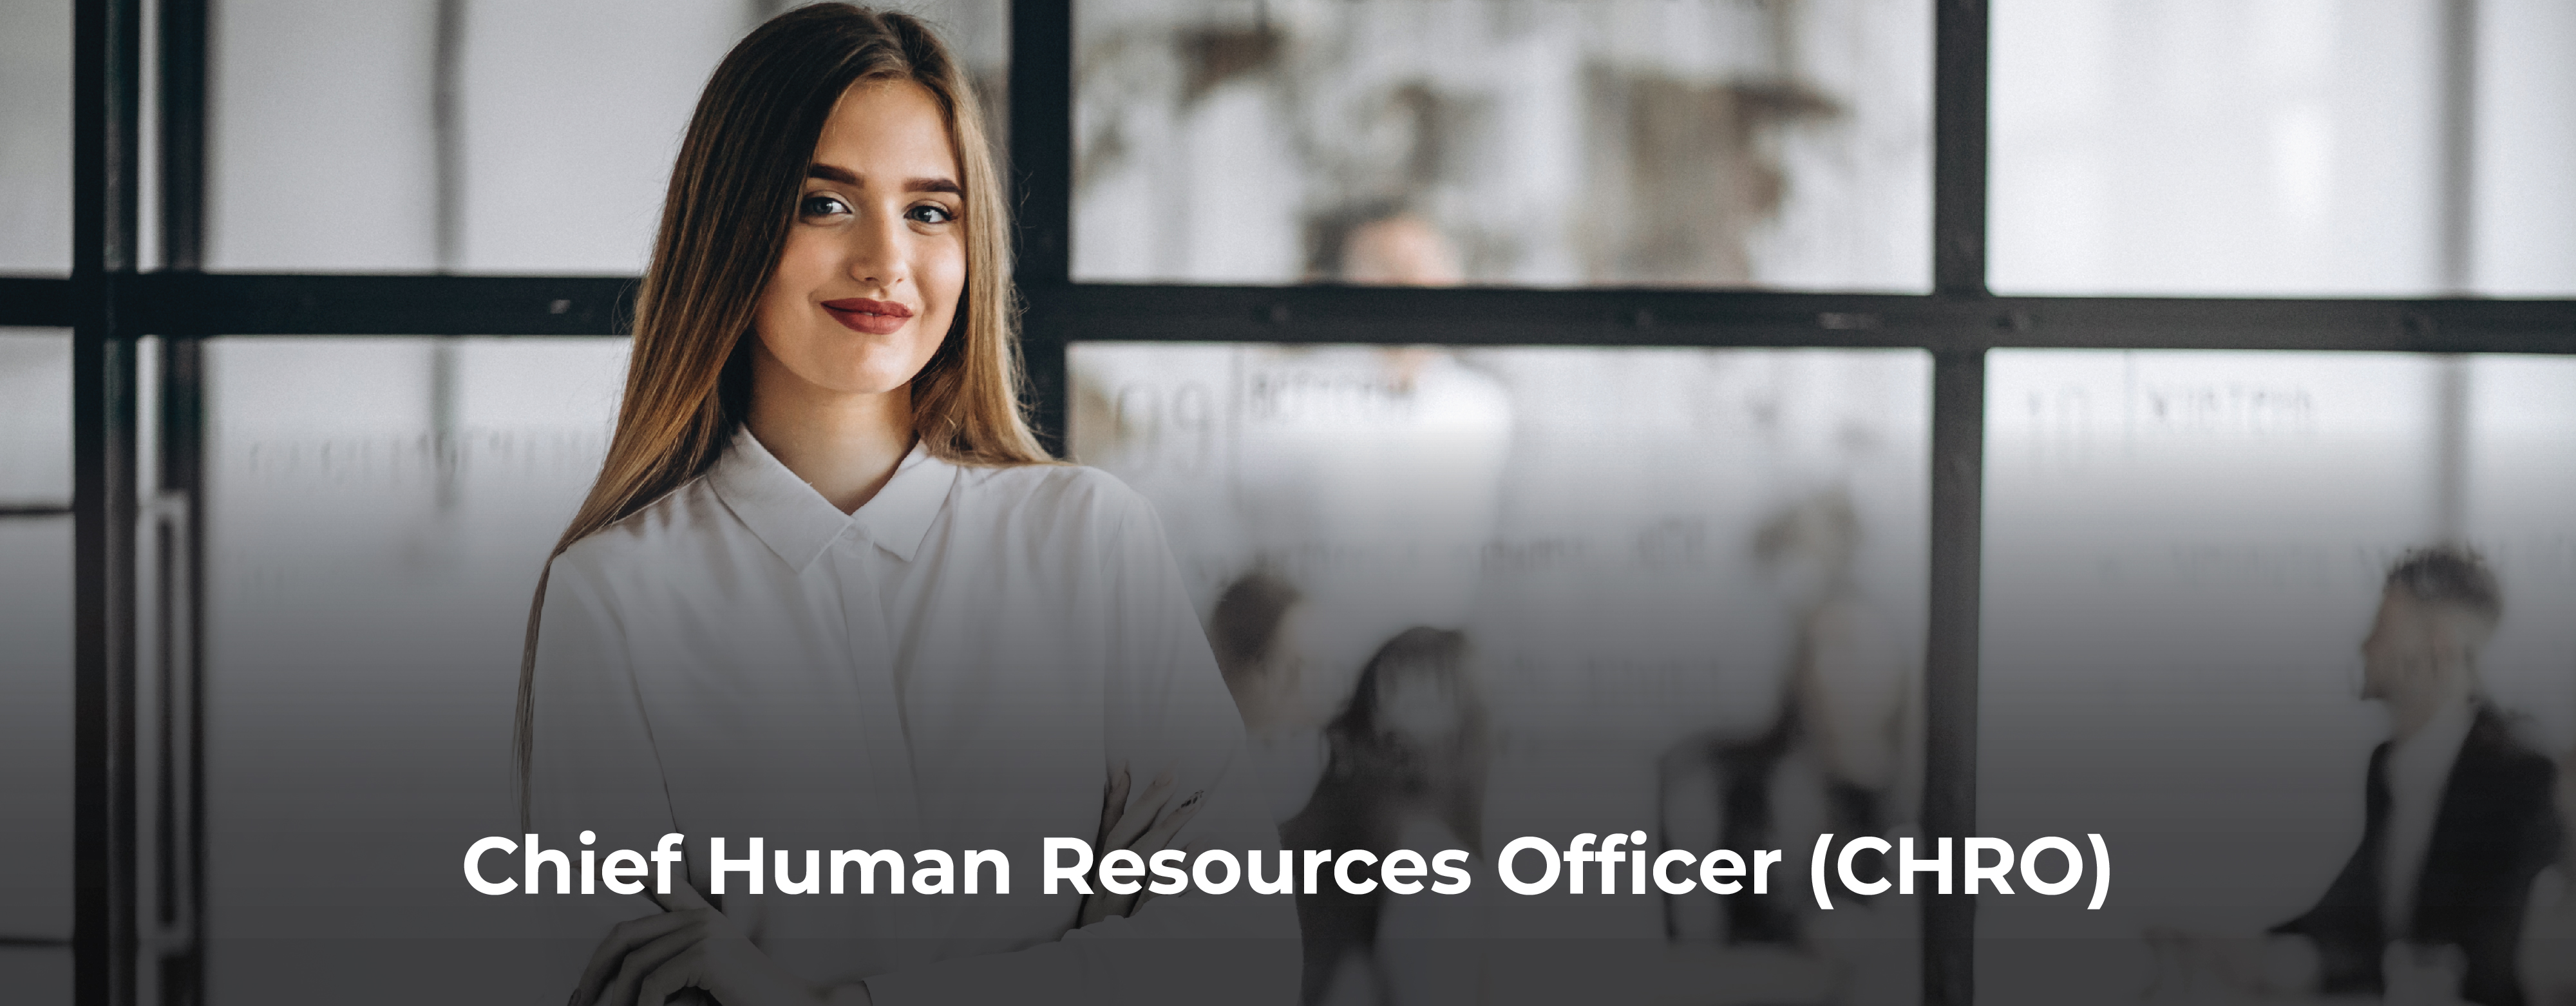 Definition of Chief Human Resources Officer (CHRO)